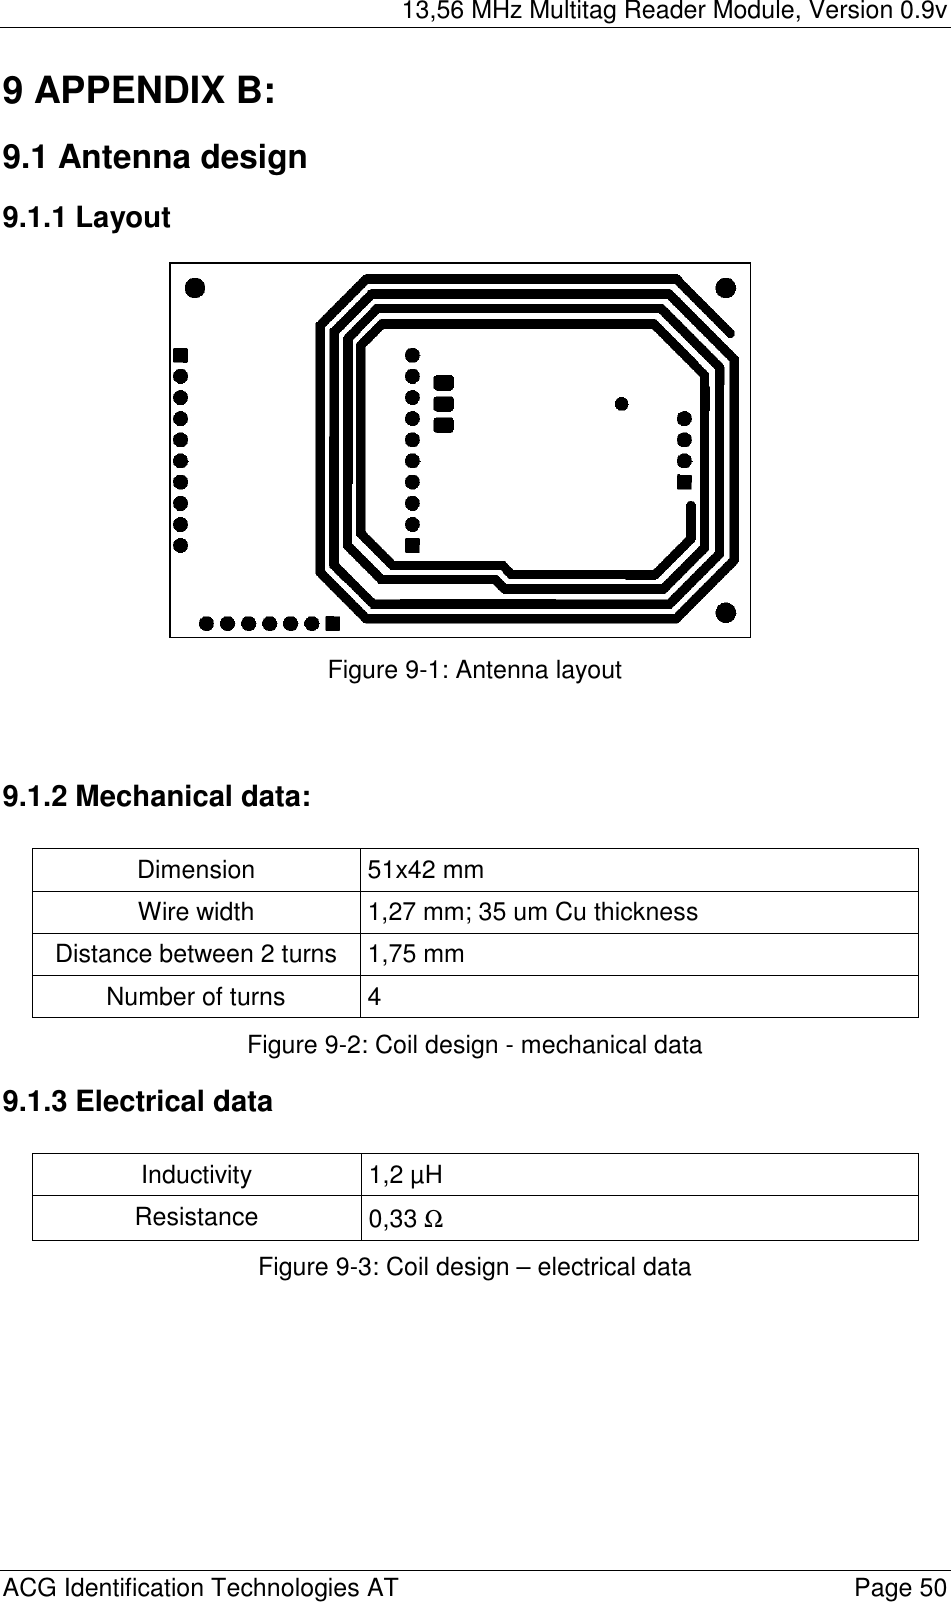 13,56 MHz Multitag Reader Module, Version 0.9v  ACG Identification Technologies AT    Page 50 9 APPENDIX B: 9.1 Antenna design 9.1.1 Layout               Figure 9-1: Antenna layout   9.1.2 Mechanical data:  Dimension 51x42 mm Wire width  1,27 mm; 35 um Cu thickness Distance between 2 turns  1,75 mm Number of turns  4 Figure 9-2: Coil design - mechanical data 9.1.3 Electrical data  Inductivity 1,2 µH Resistance  0,33 Ω Figure 9-3: Coil design – electrical data 